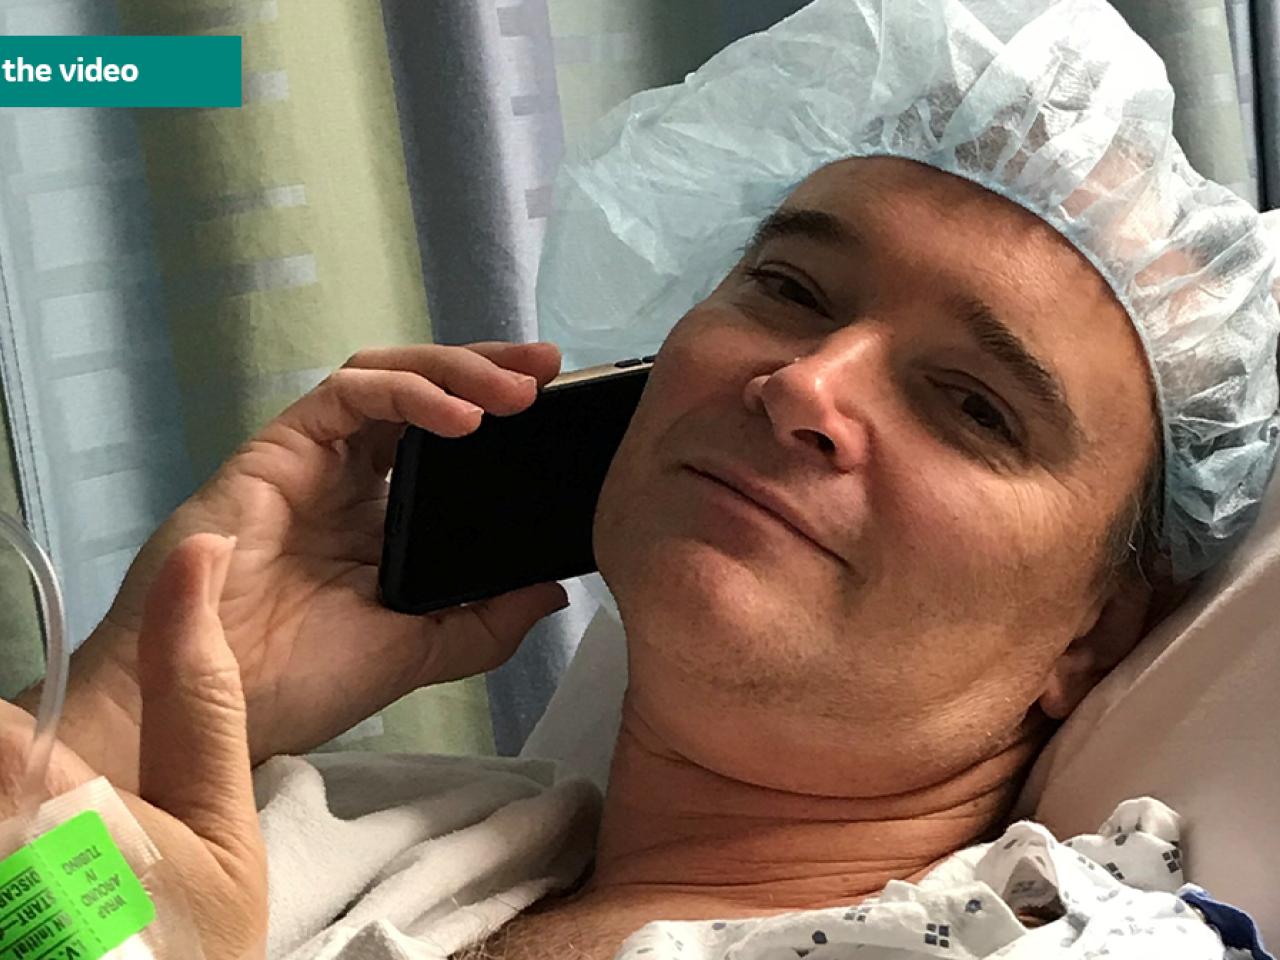 Chet Kitchen on a cell phone, wearing a hospital gown and hair covering.